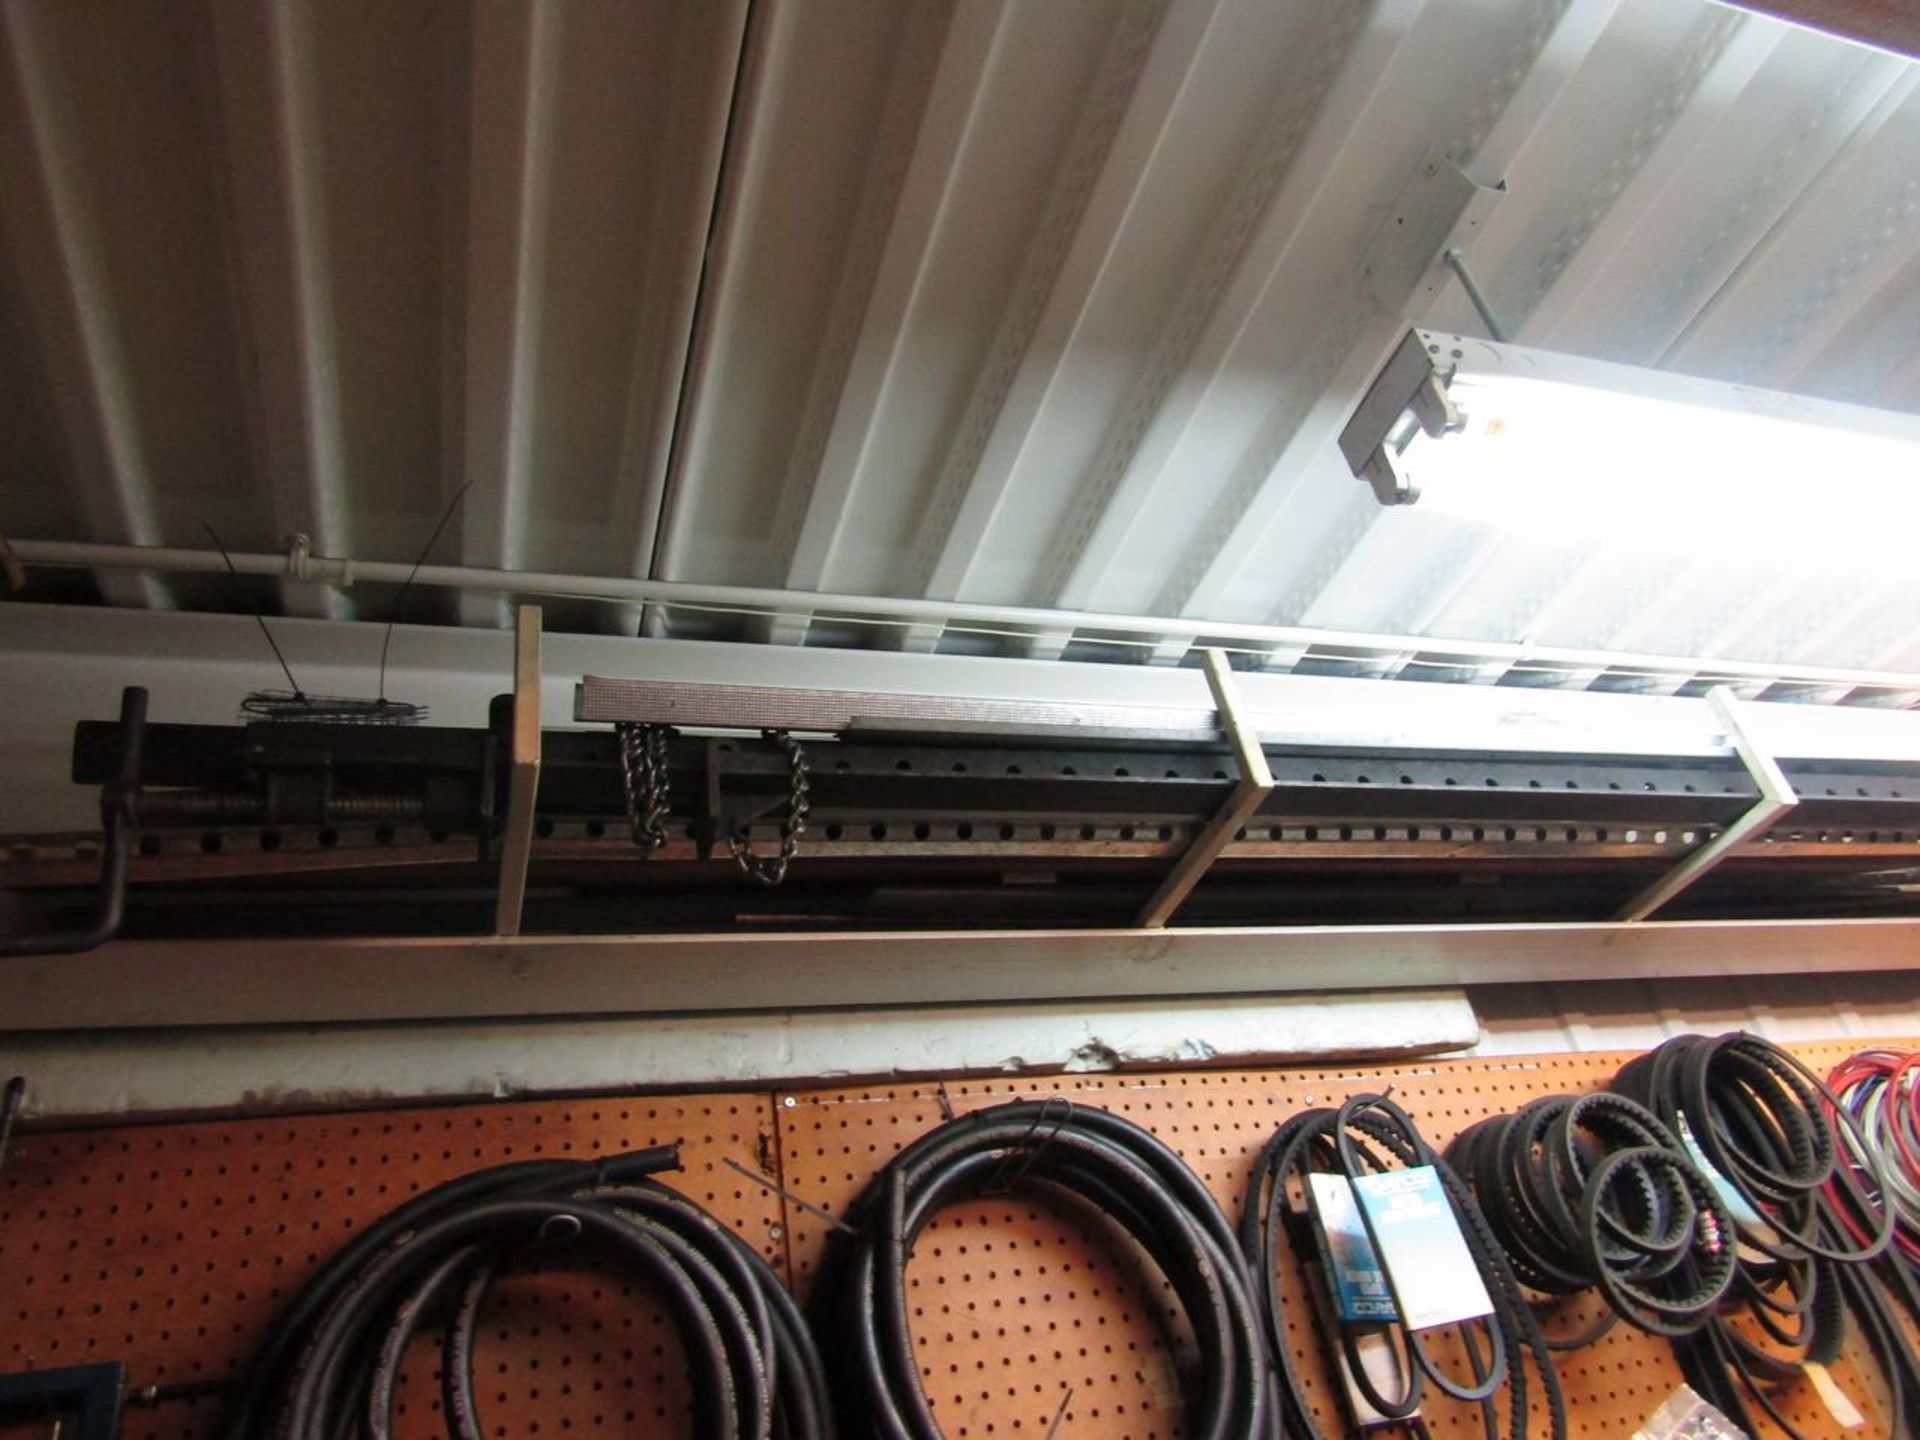 Conduit and metal in Rafters of Parts Room - Image 2 of 2